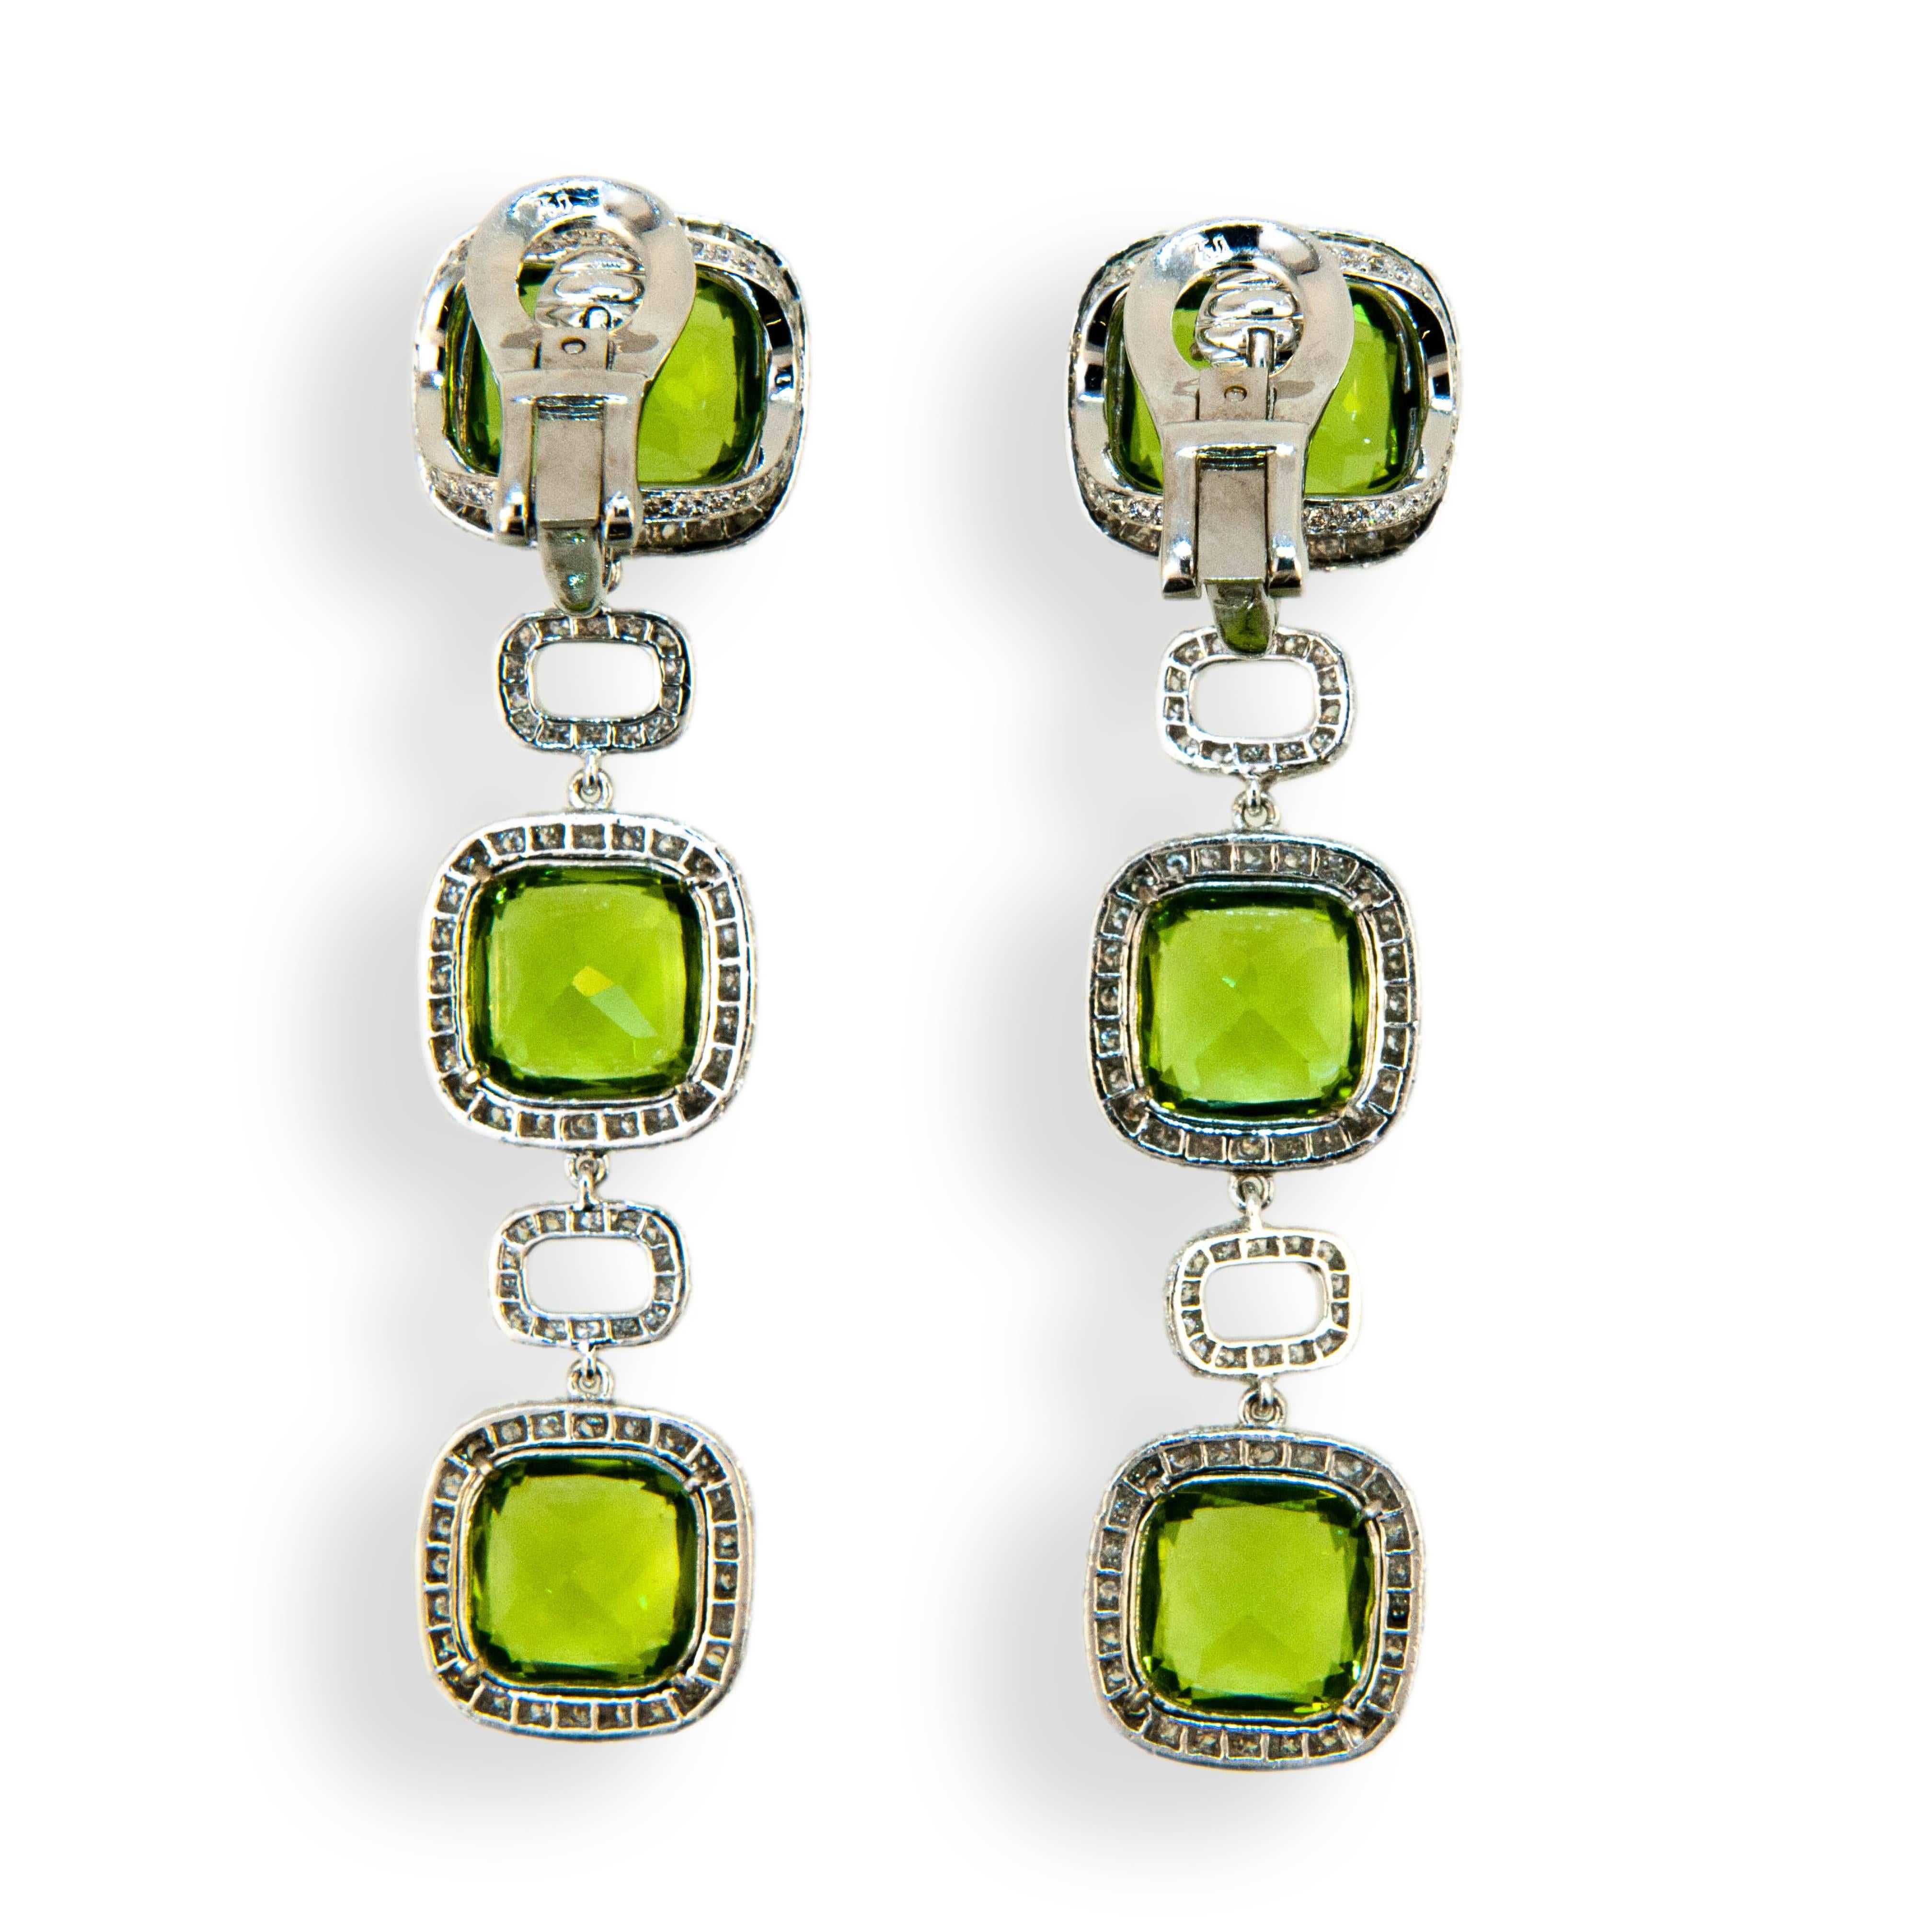 18 karat white gold earring 12 x 10 mm Peridot at top with two 9.5 x 9.5 mm Peridot below 28.90 carats total weight with 542 micro set diamonds surrounding and rectangular diamond sections separating 3.46 carats total weight. Earrings may be worn as